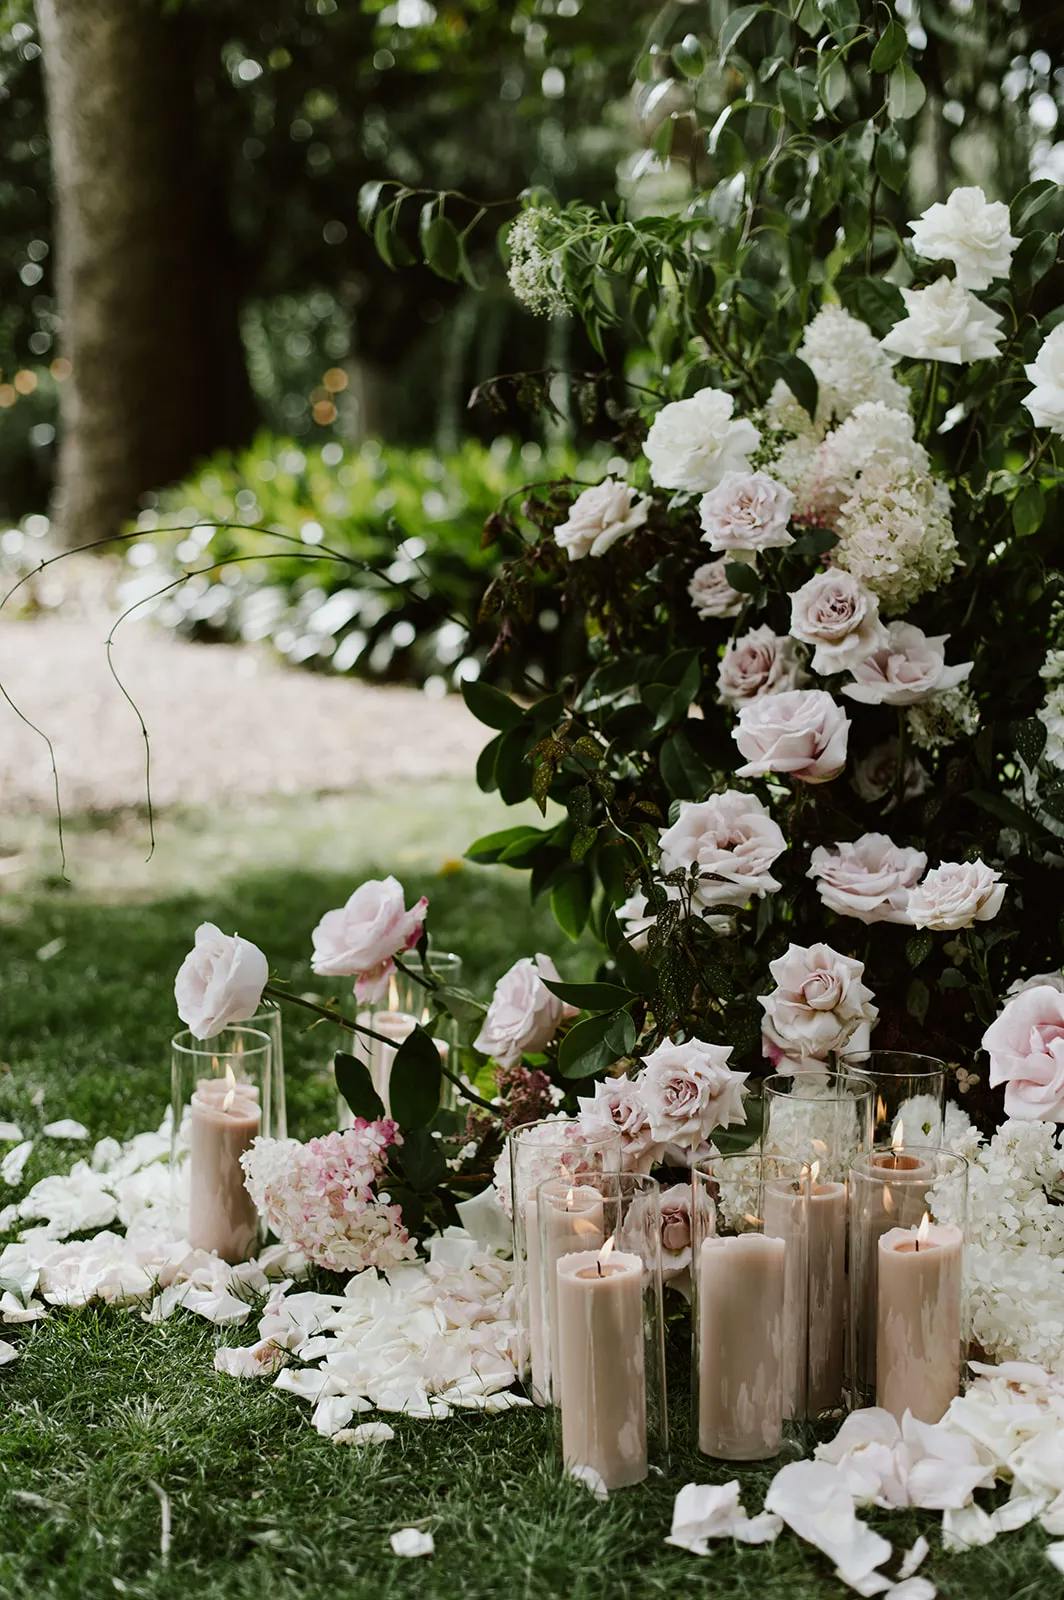 Flowers and candles at ceremony